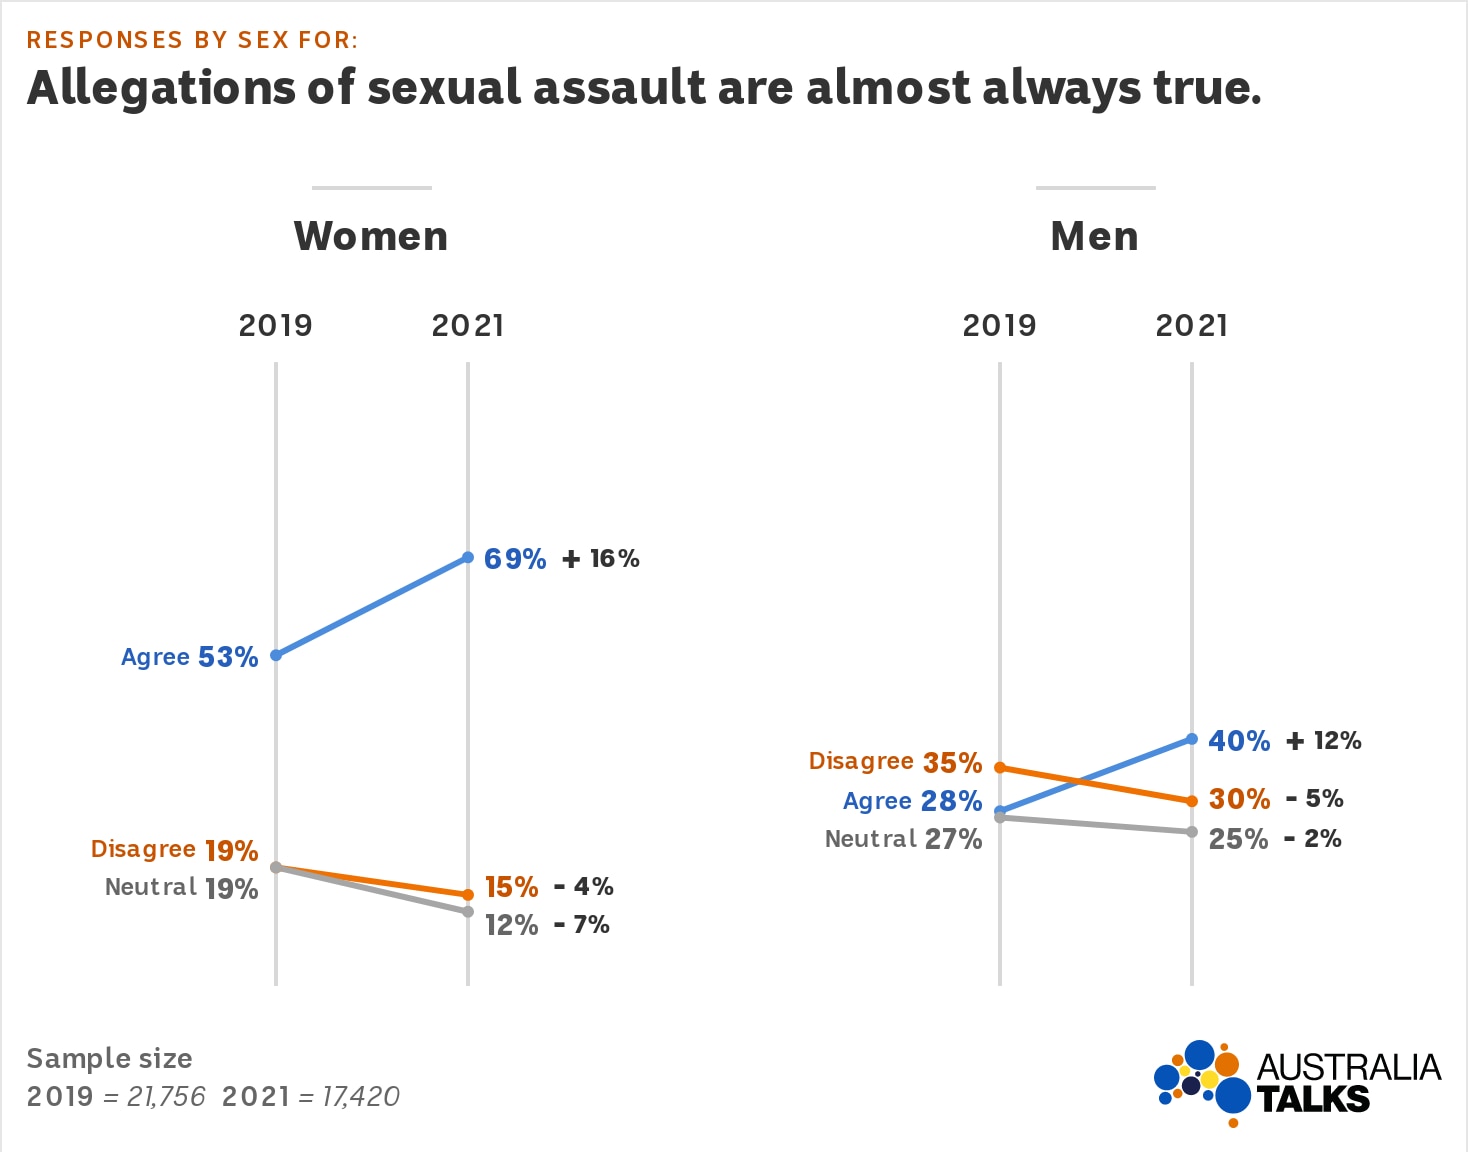 Graph shows agreement with the statement increasing to 69% for women and 40% for men.